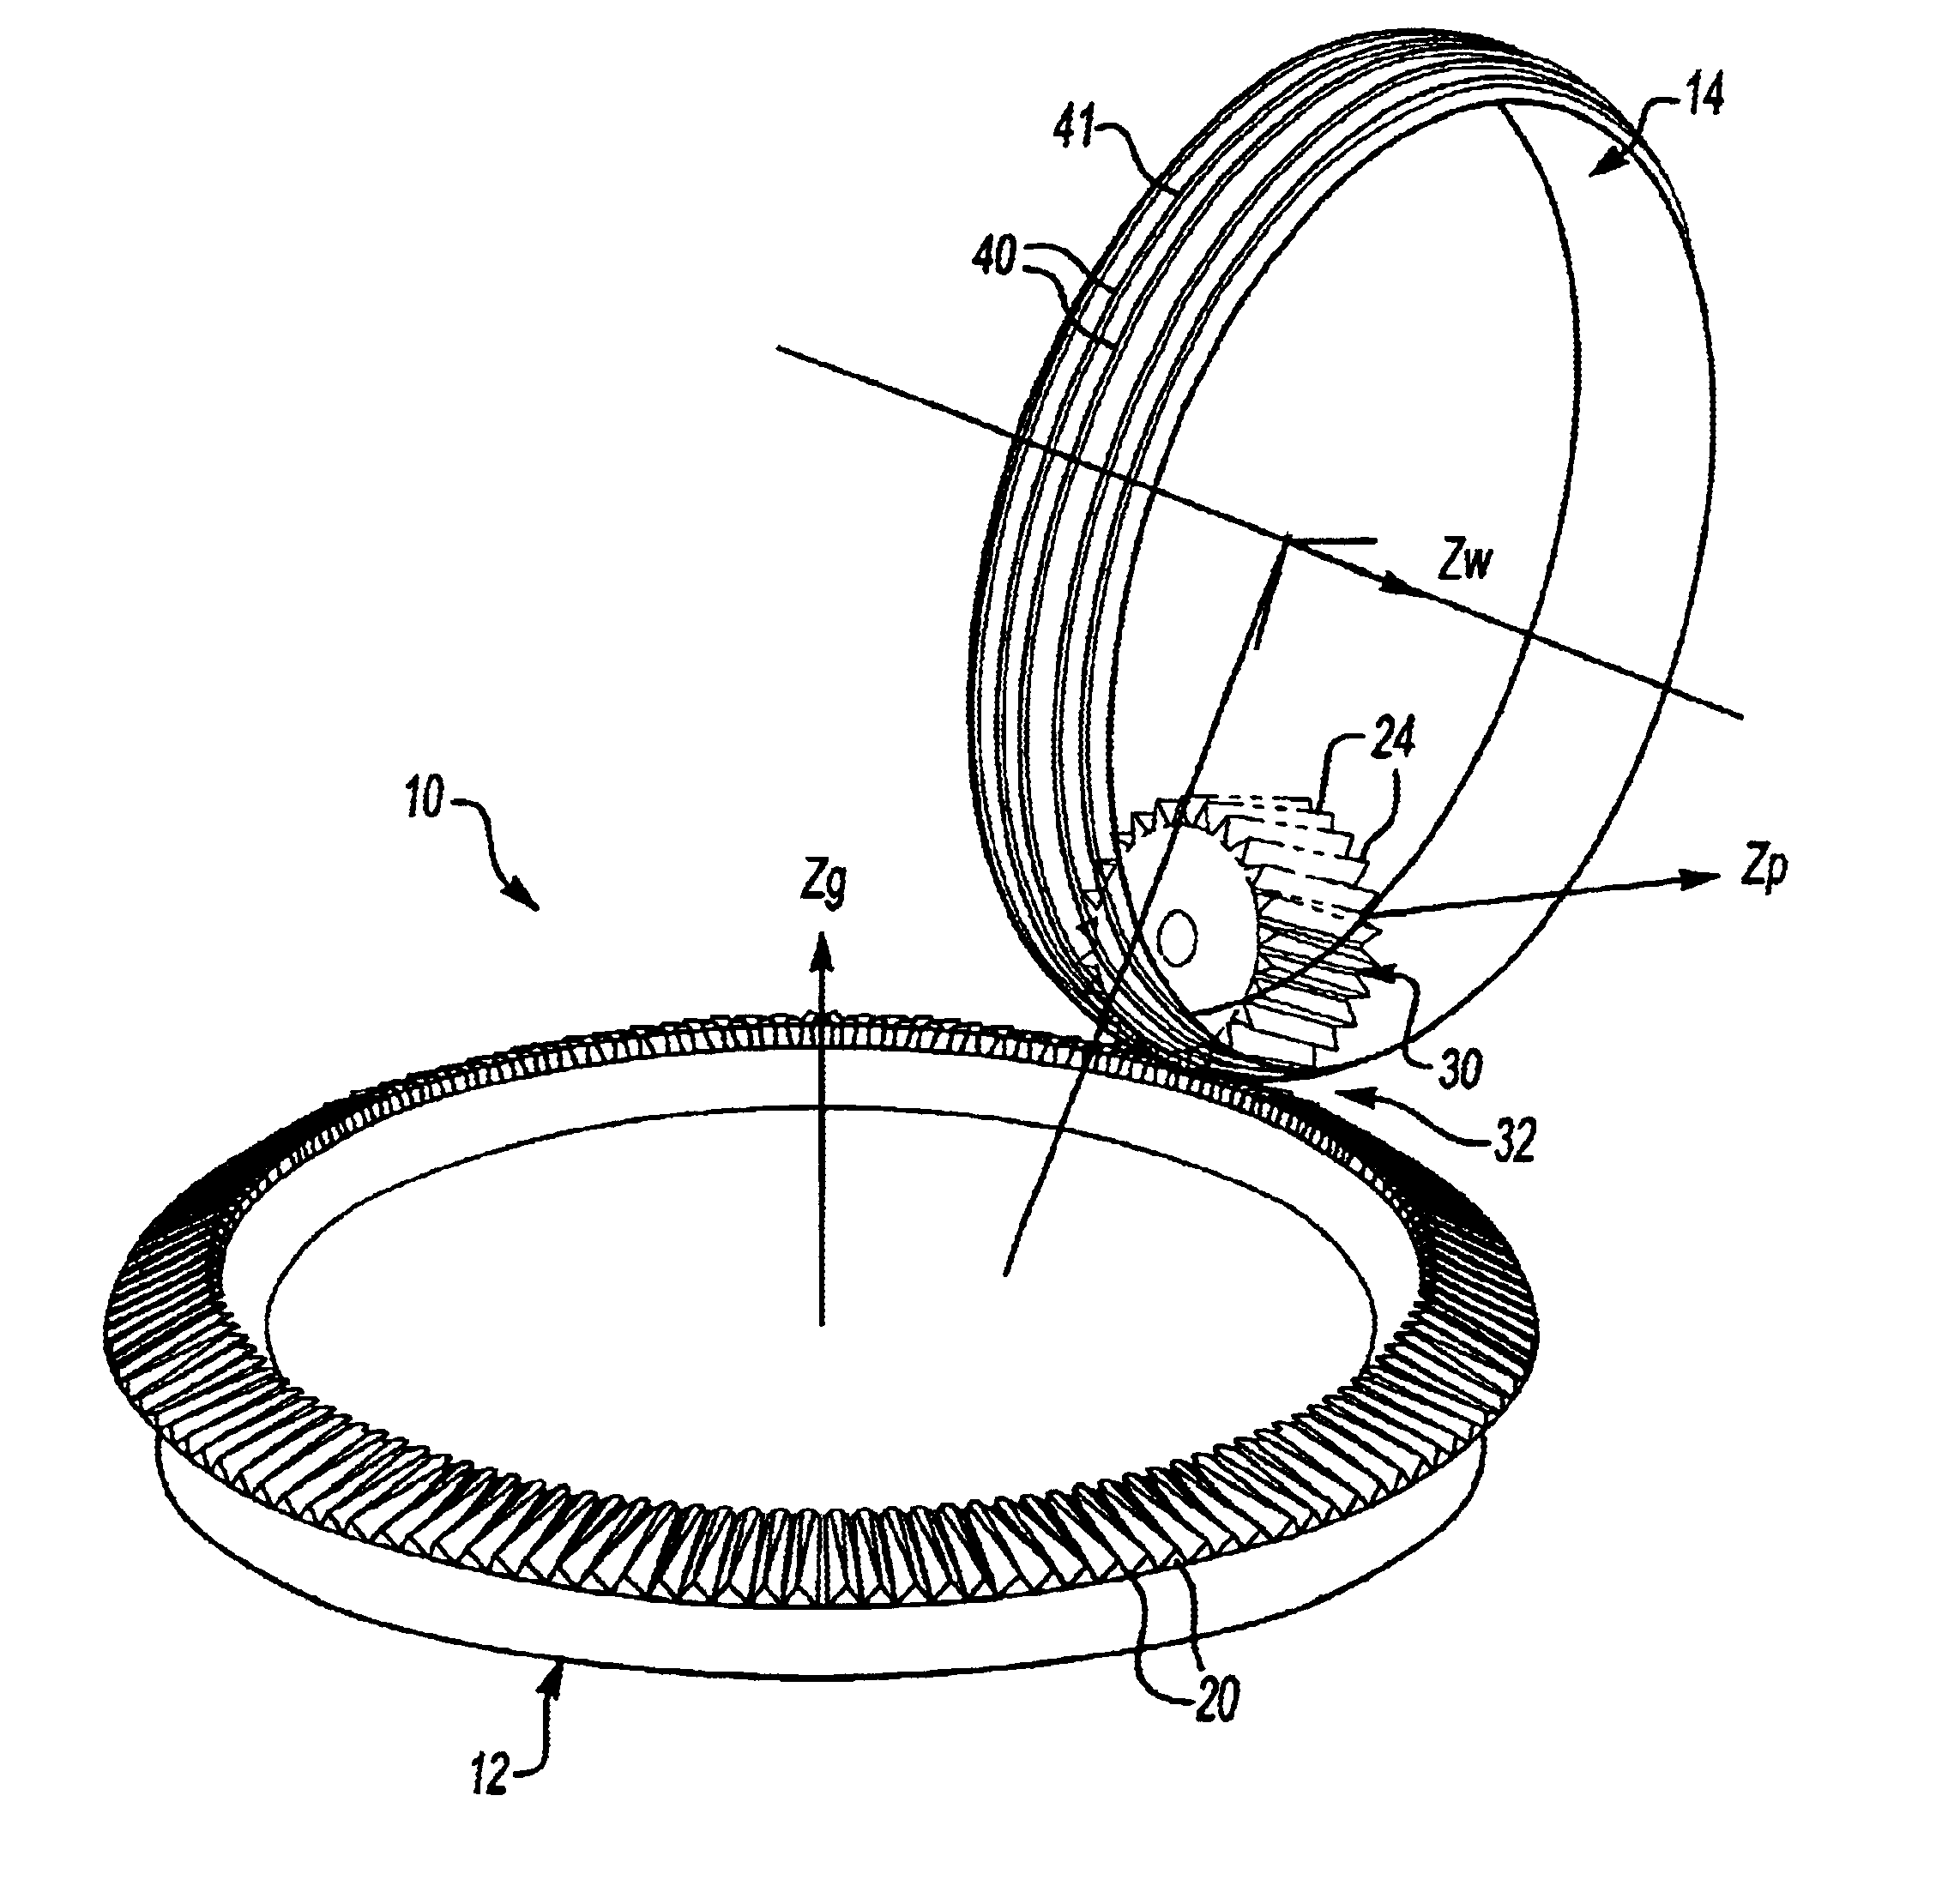 Method for forming a grinding worm for forming a conical face gear that meshes with a conical involute pinion